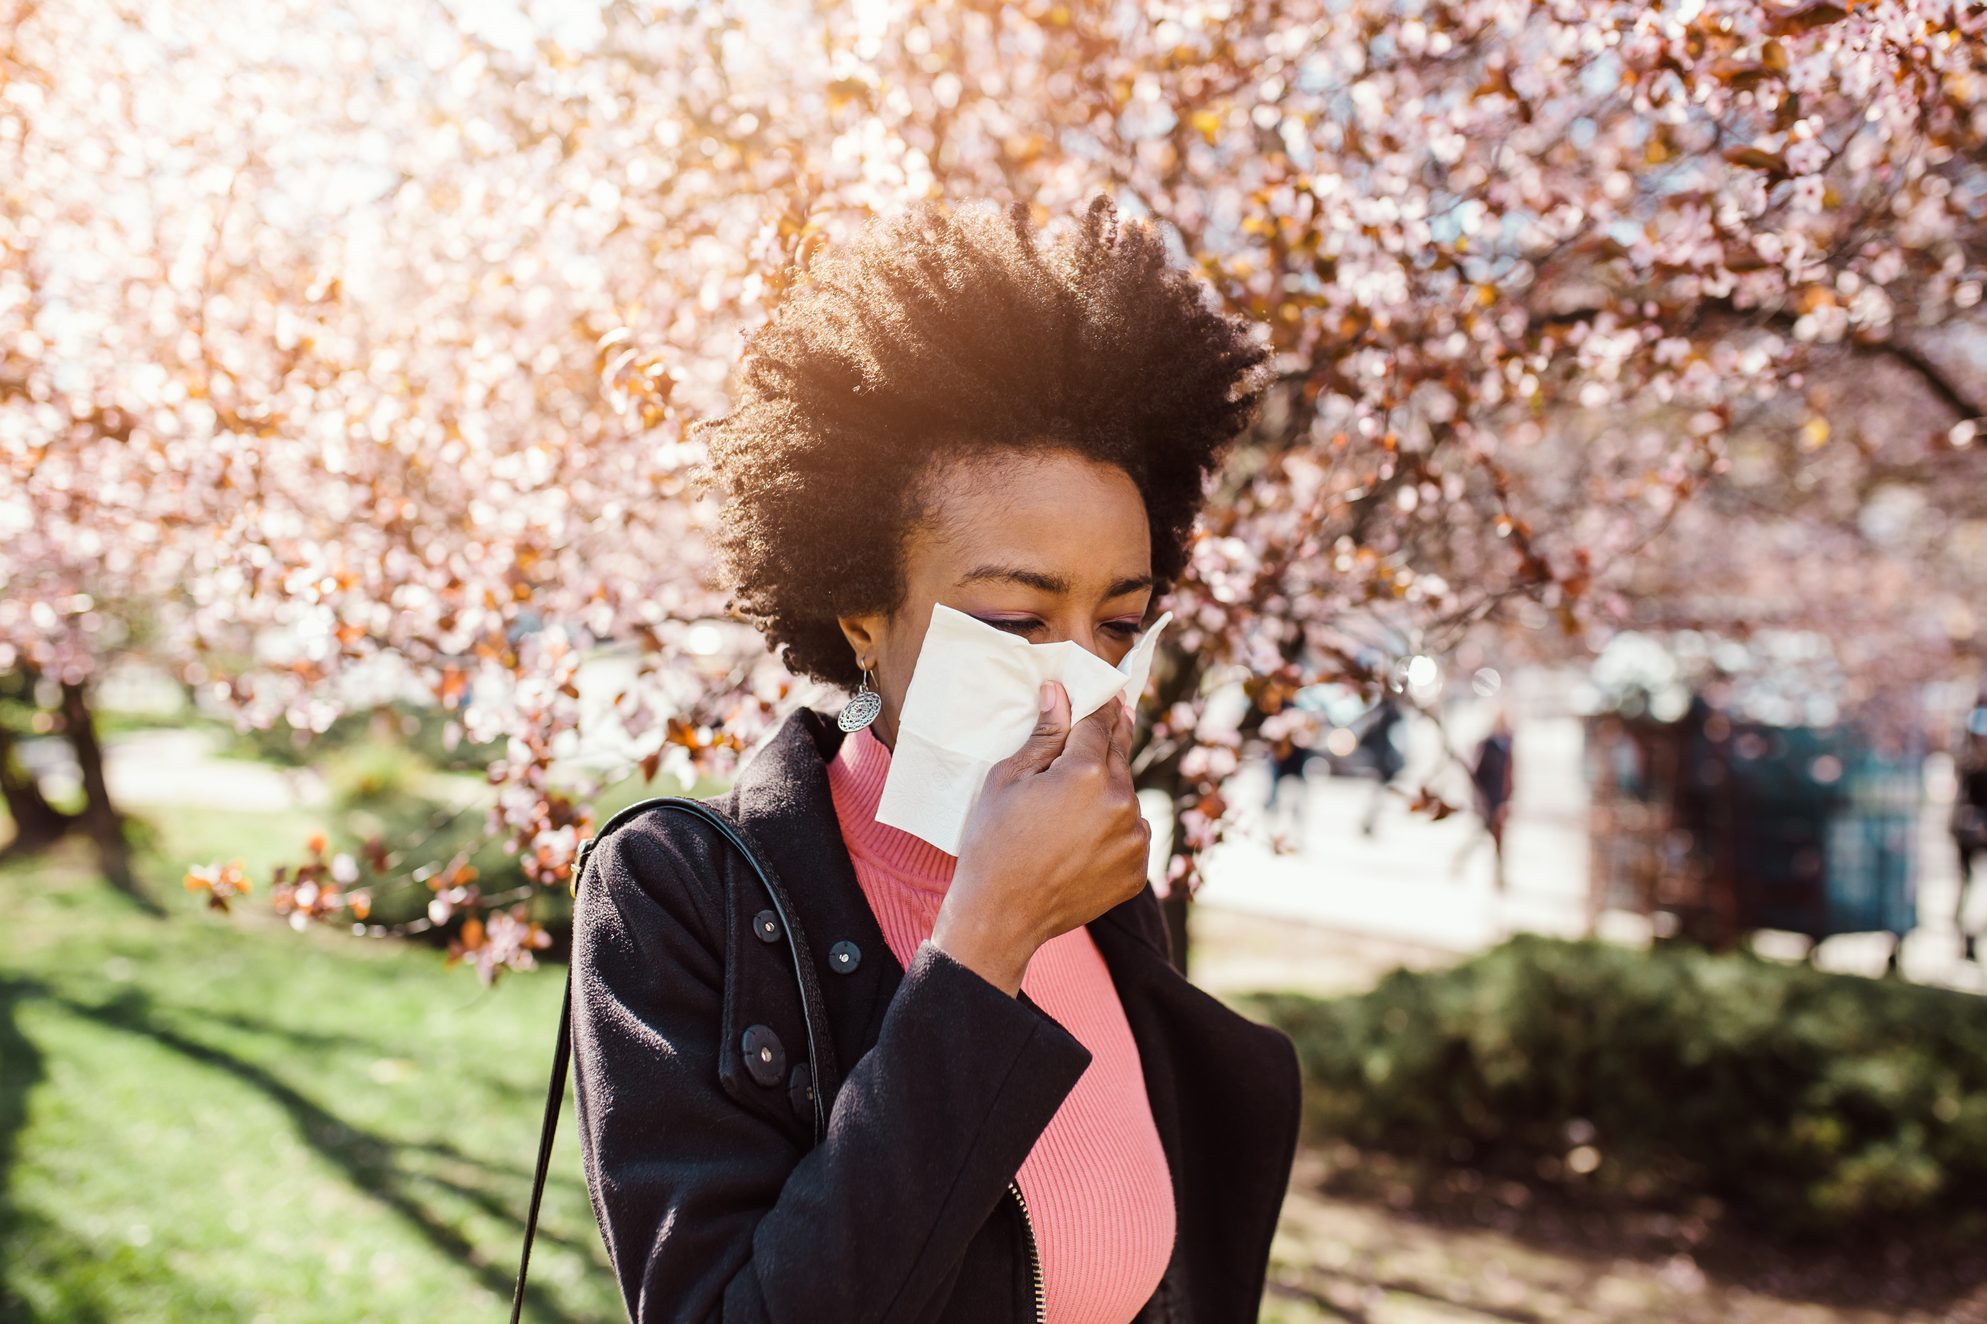 Can Allergies Make You Cough? Here's What a Doctor Says